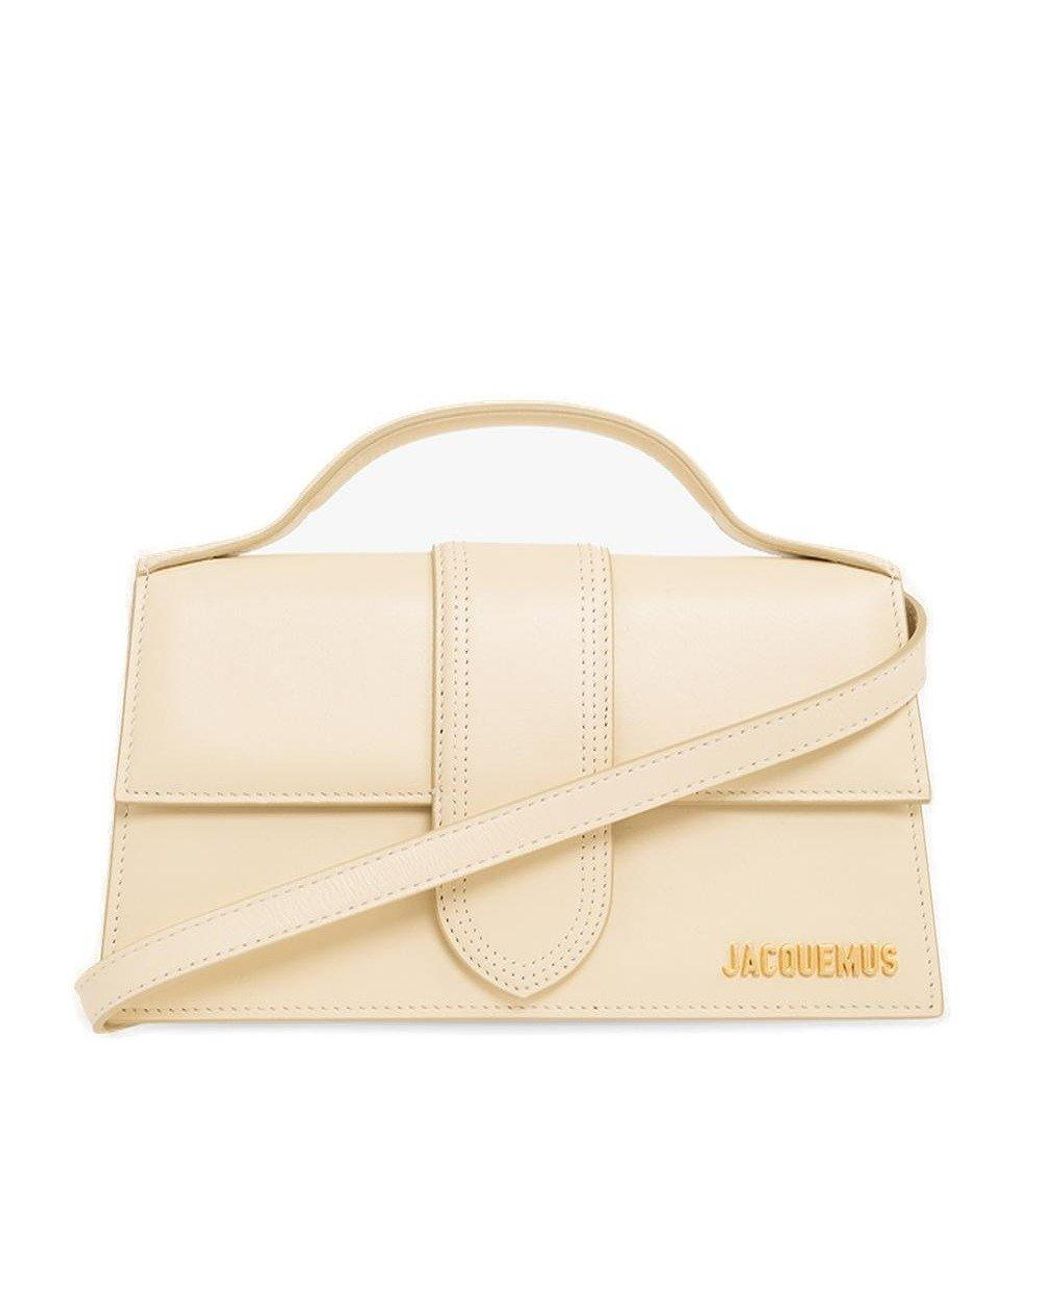 Jacquemus Le Grand Logo Lettering Tote Bag in Natural | Lyst